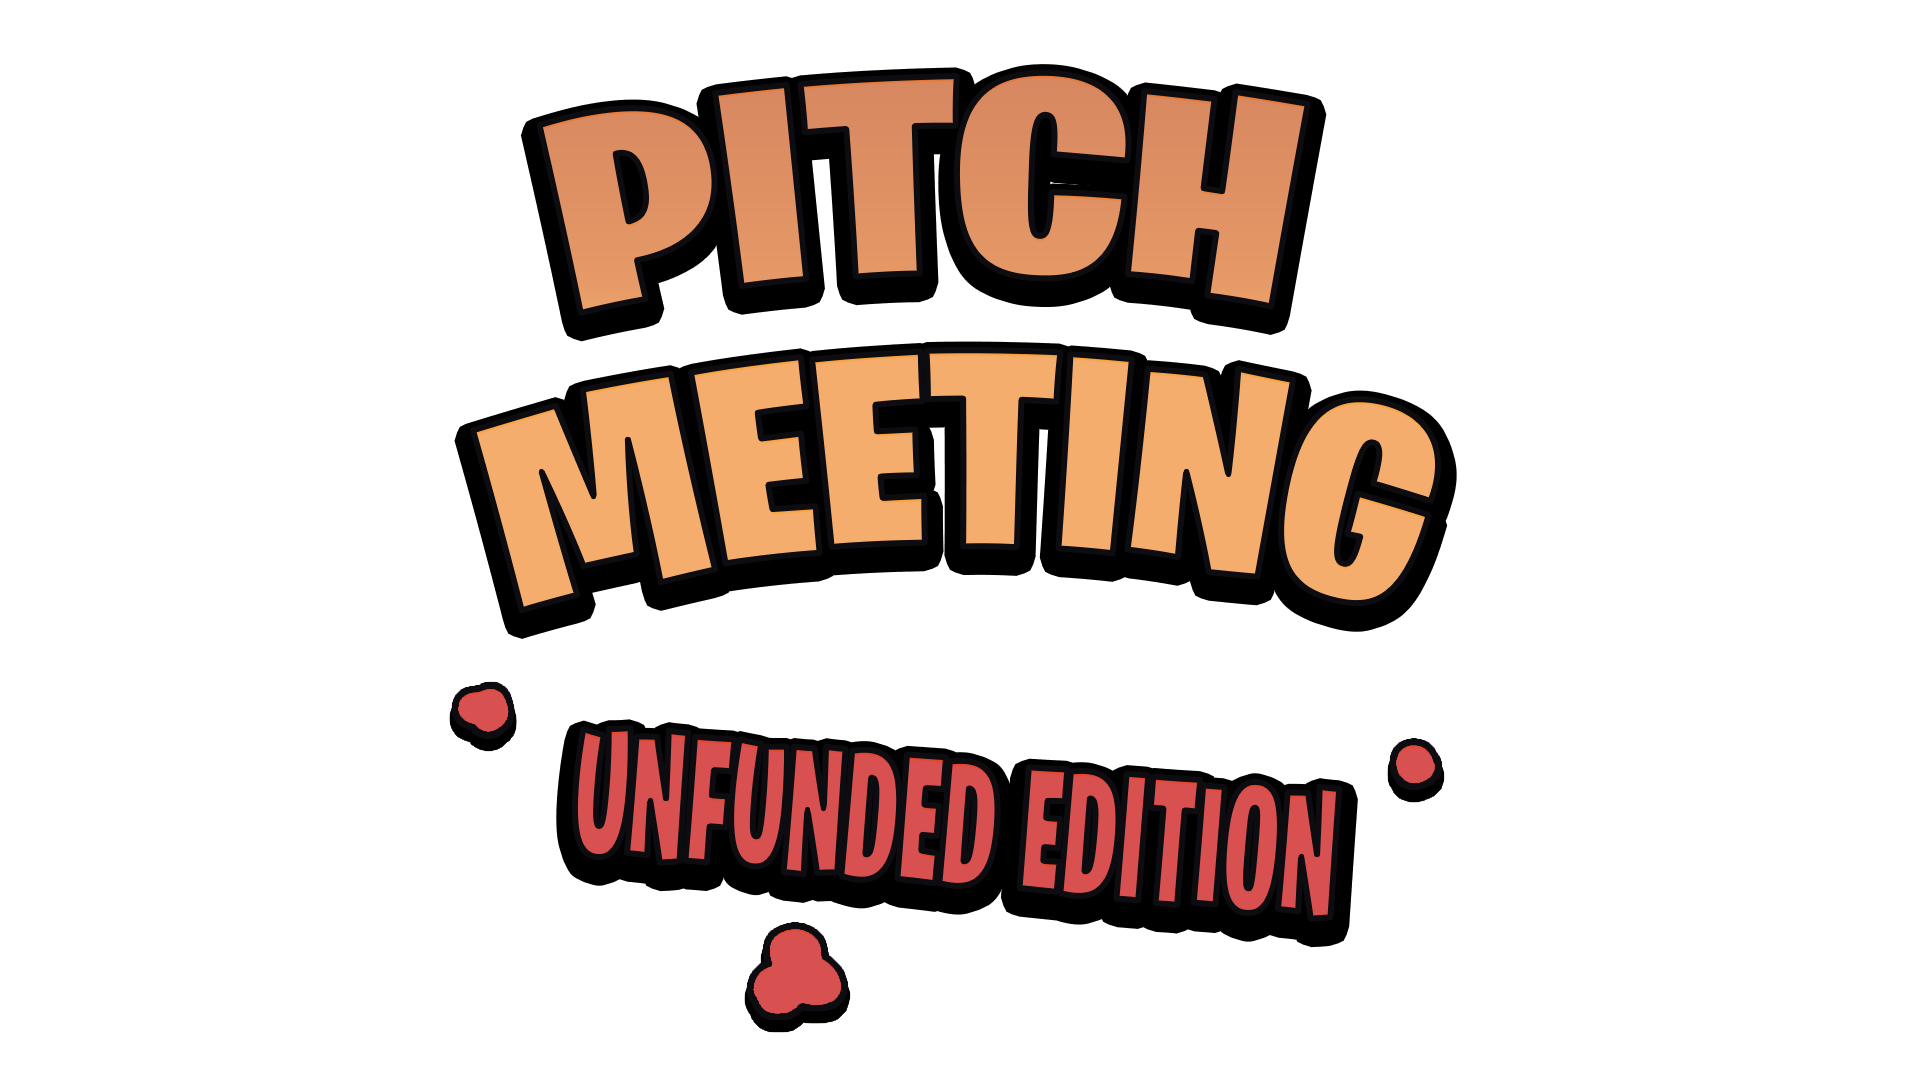 Pitch Meeting